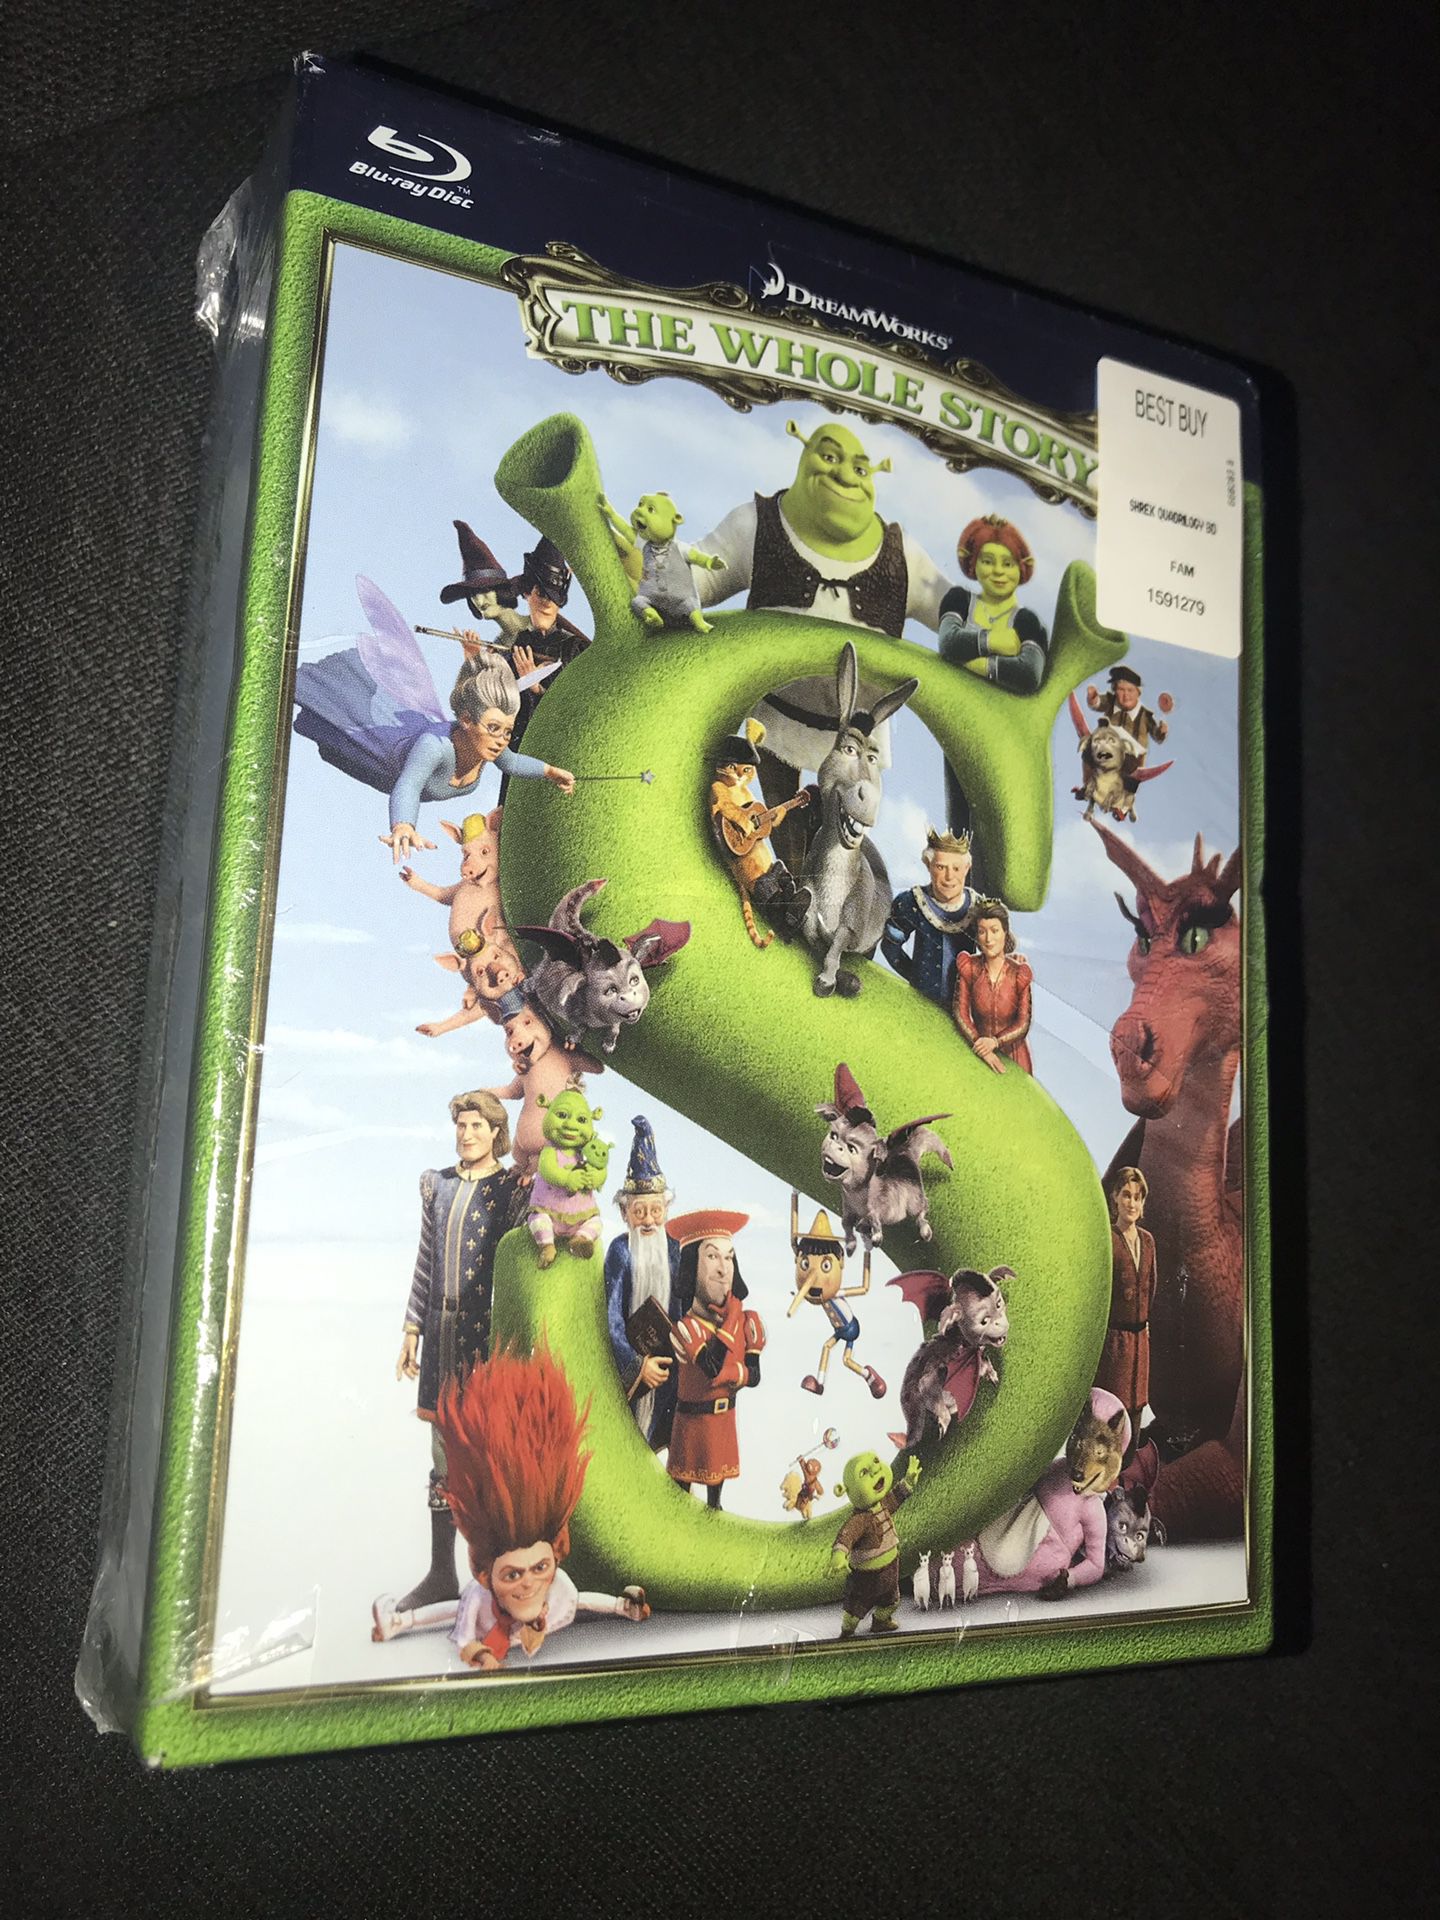 Shrek Movies Blue Ray The Whole Story Collection Sealed in Manufacturing Plastic